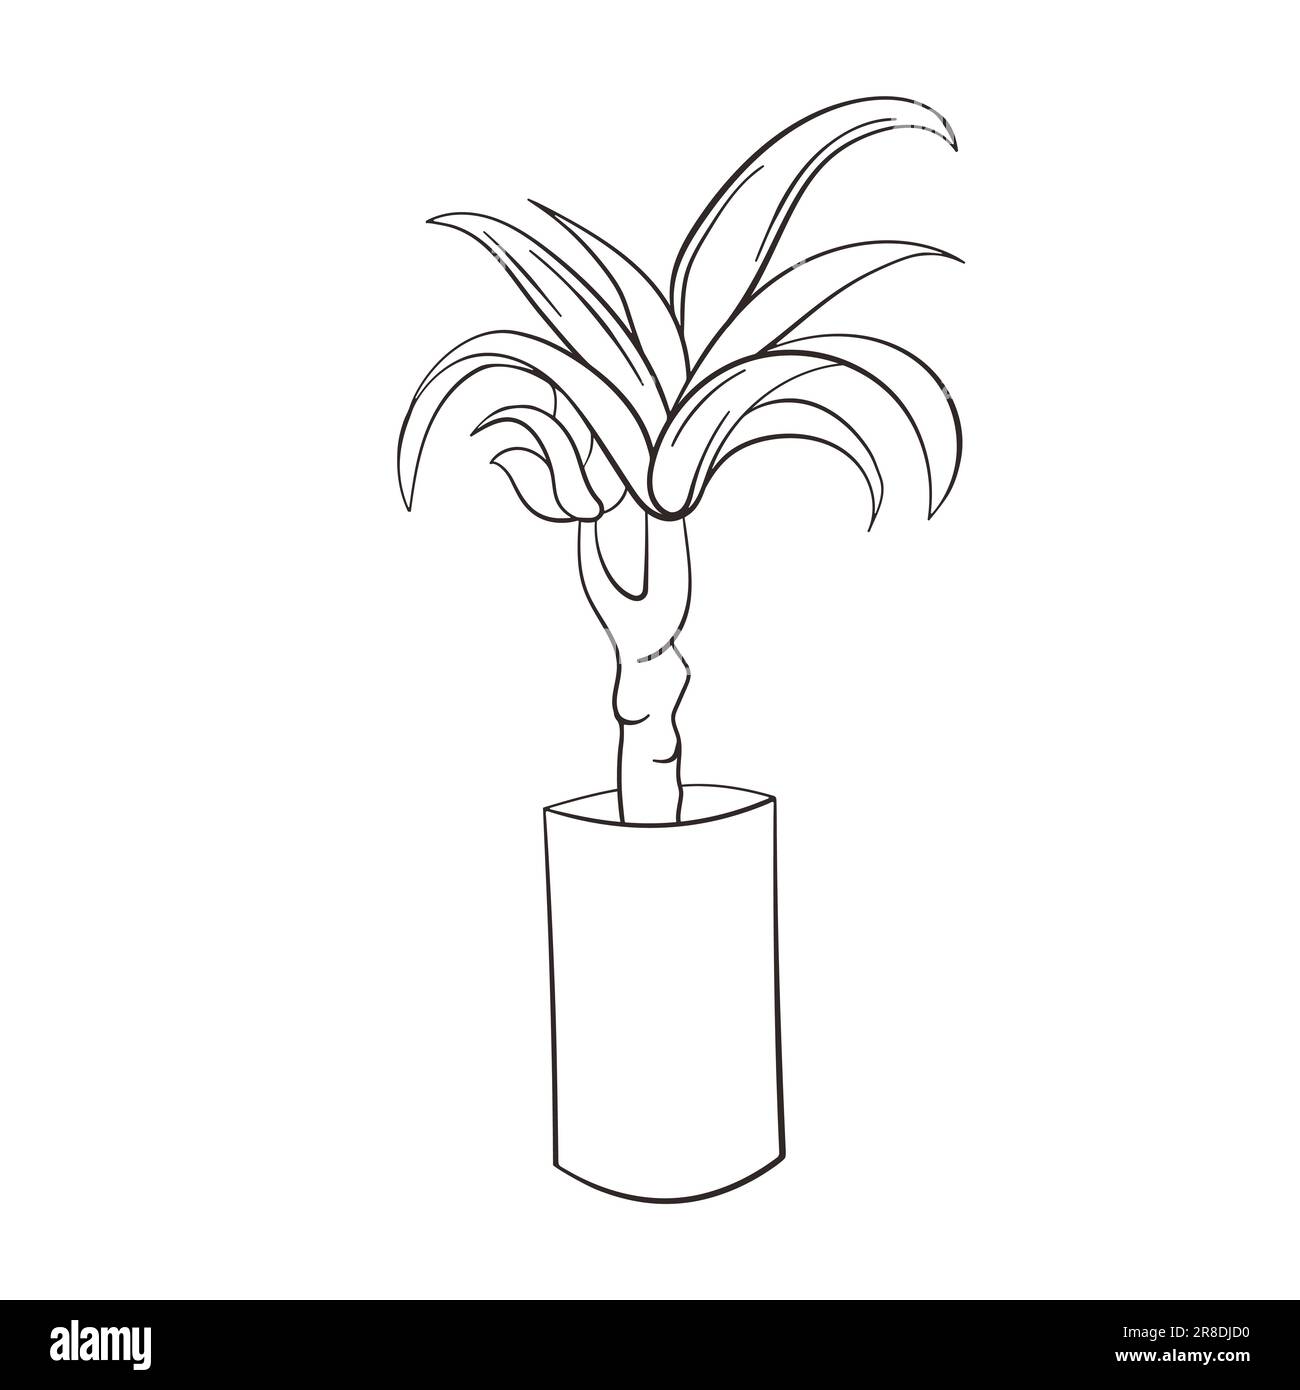 Dracena doodle illustration. Vector illustration. Linear vector dracena icon. Isolated outline picture of the houseplant on white background. Stock Vector